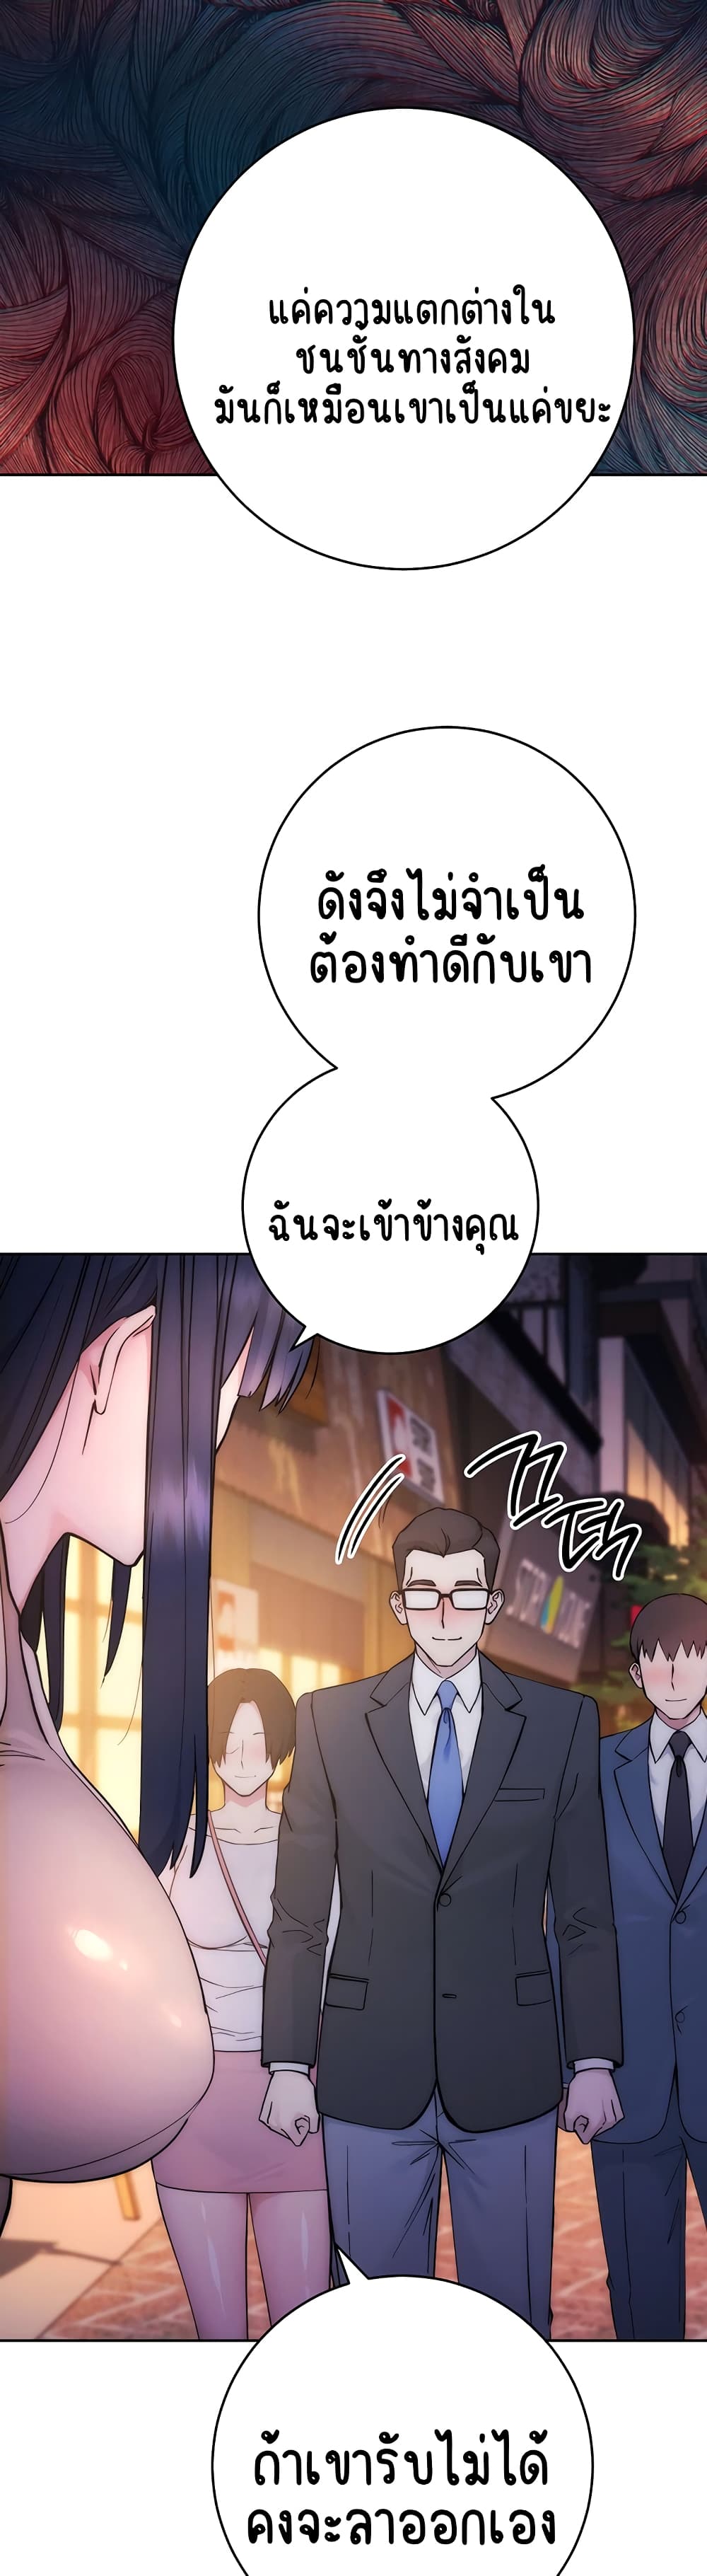 Outsider: The Invisible Man ตอนที่ 1 ภาพ 56